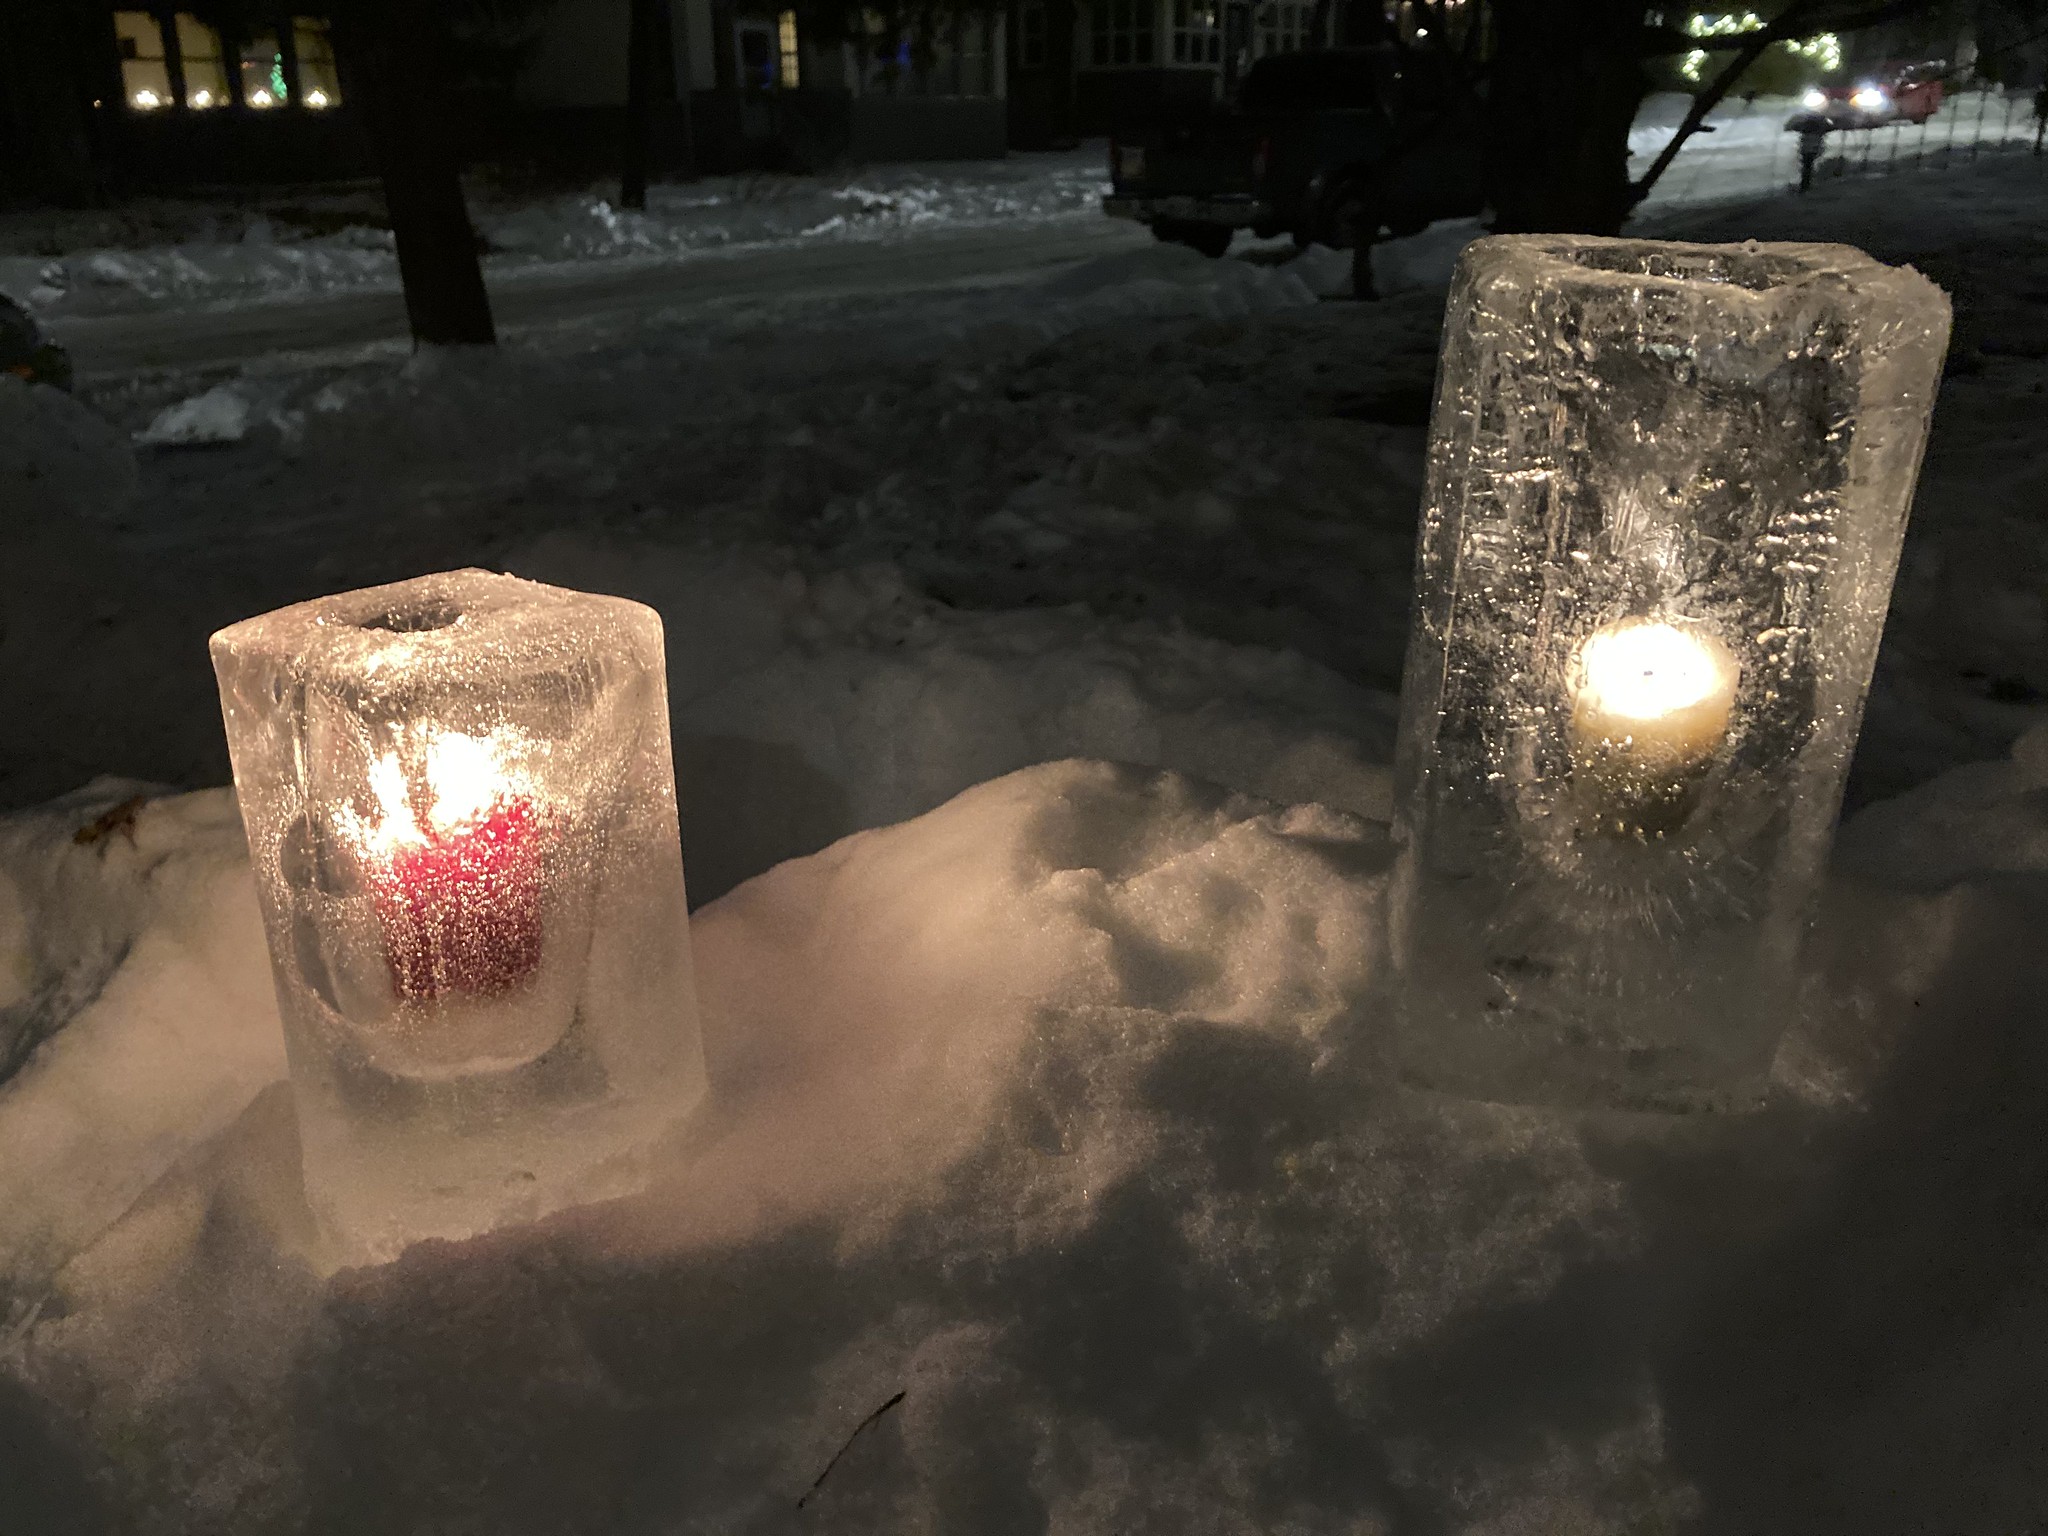 Ice Candles